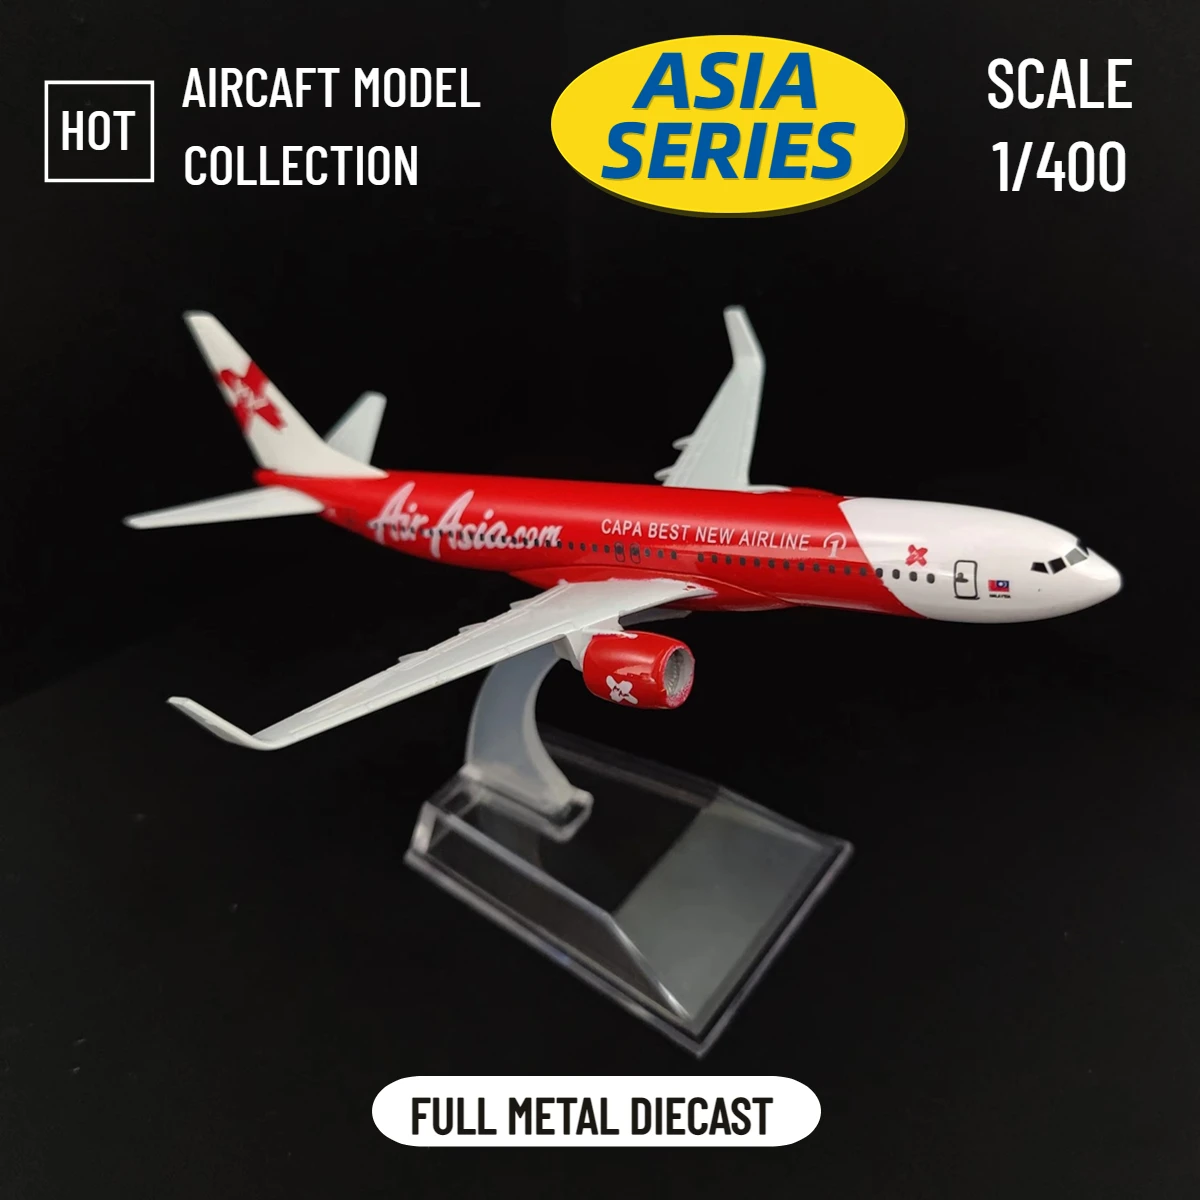 

Scale 1:400 Metal Aircraft Replica 15cm Malaysia Air Asia Airline Boeing Airbus Plane Aviation Model Miniature Gift for Boy Girl